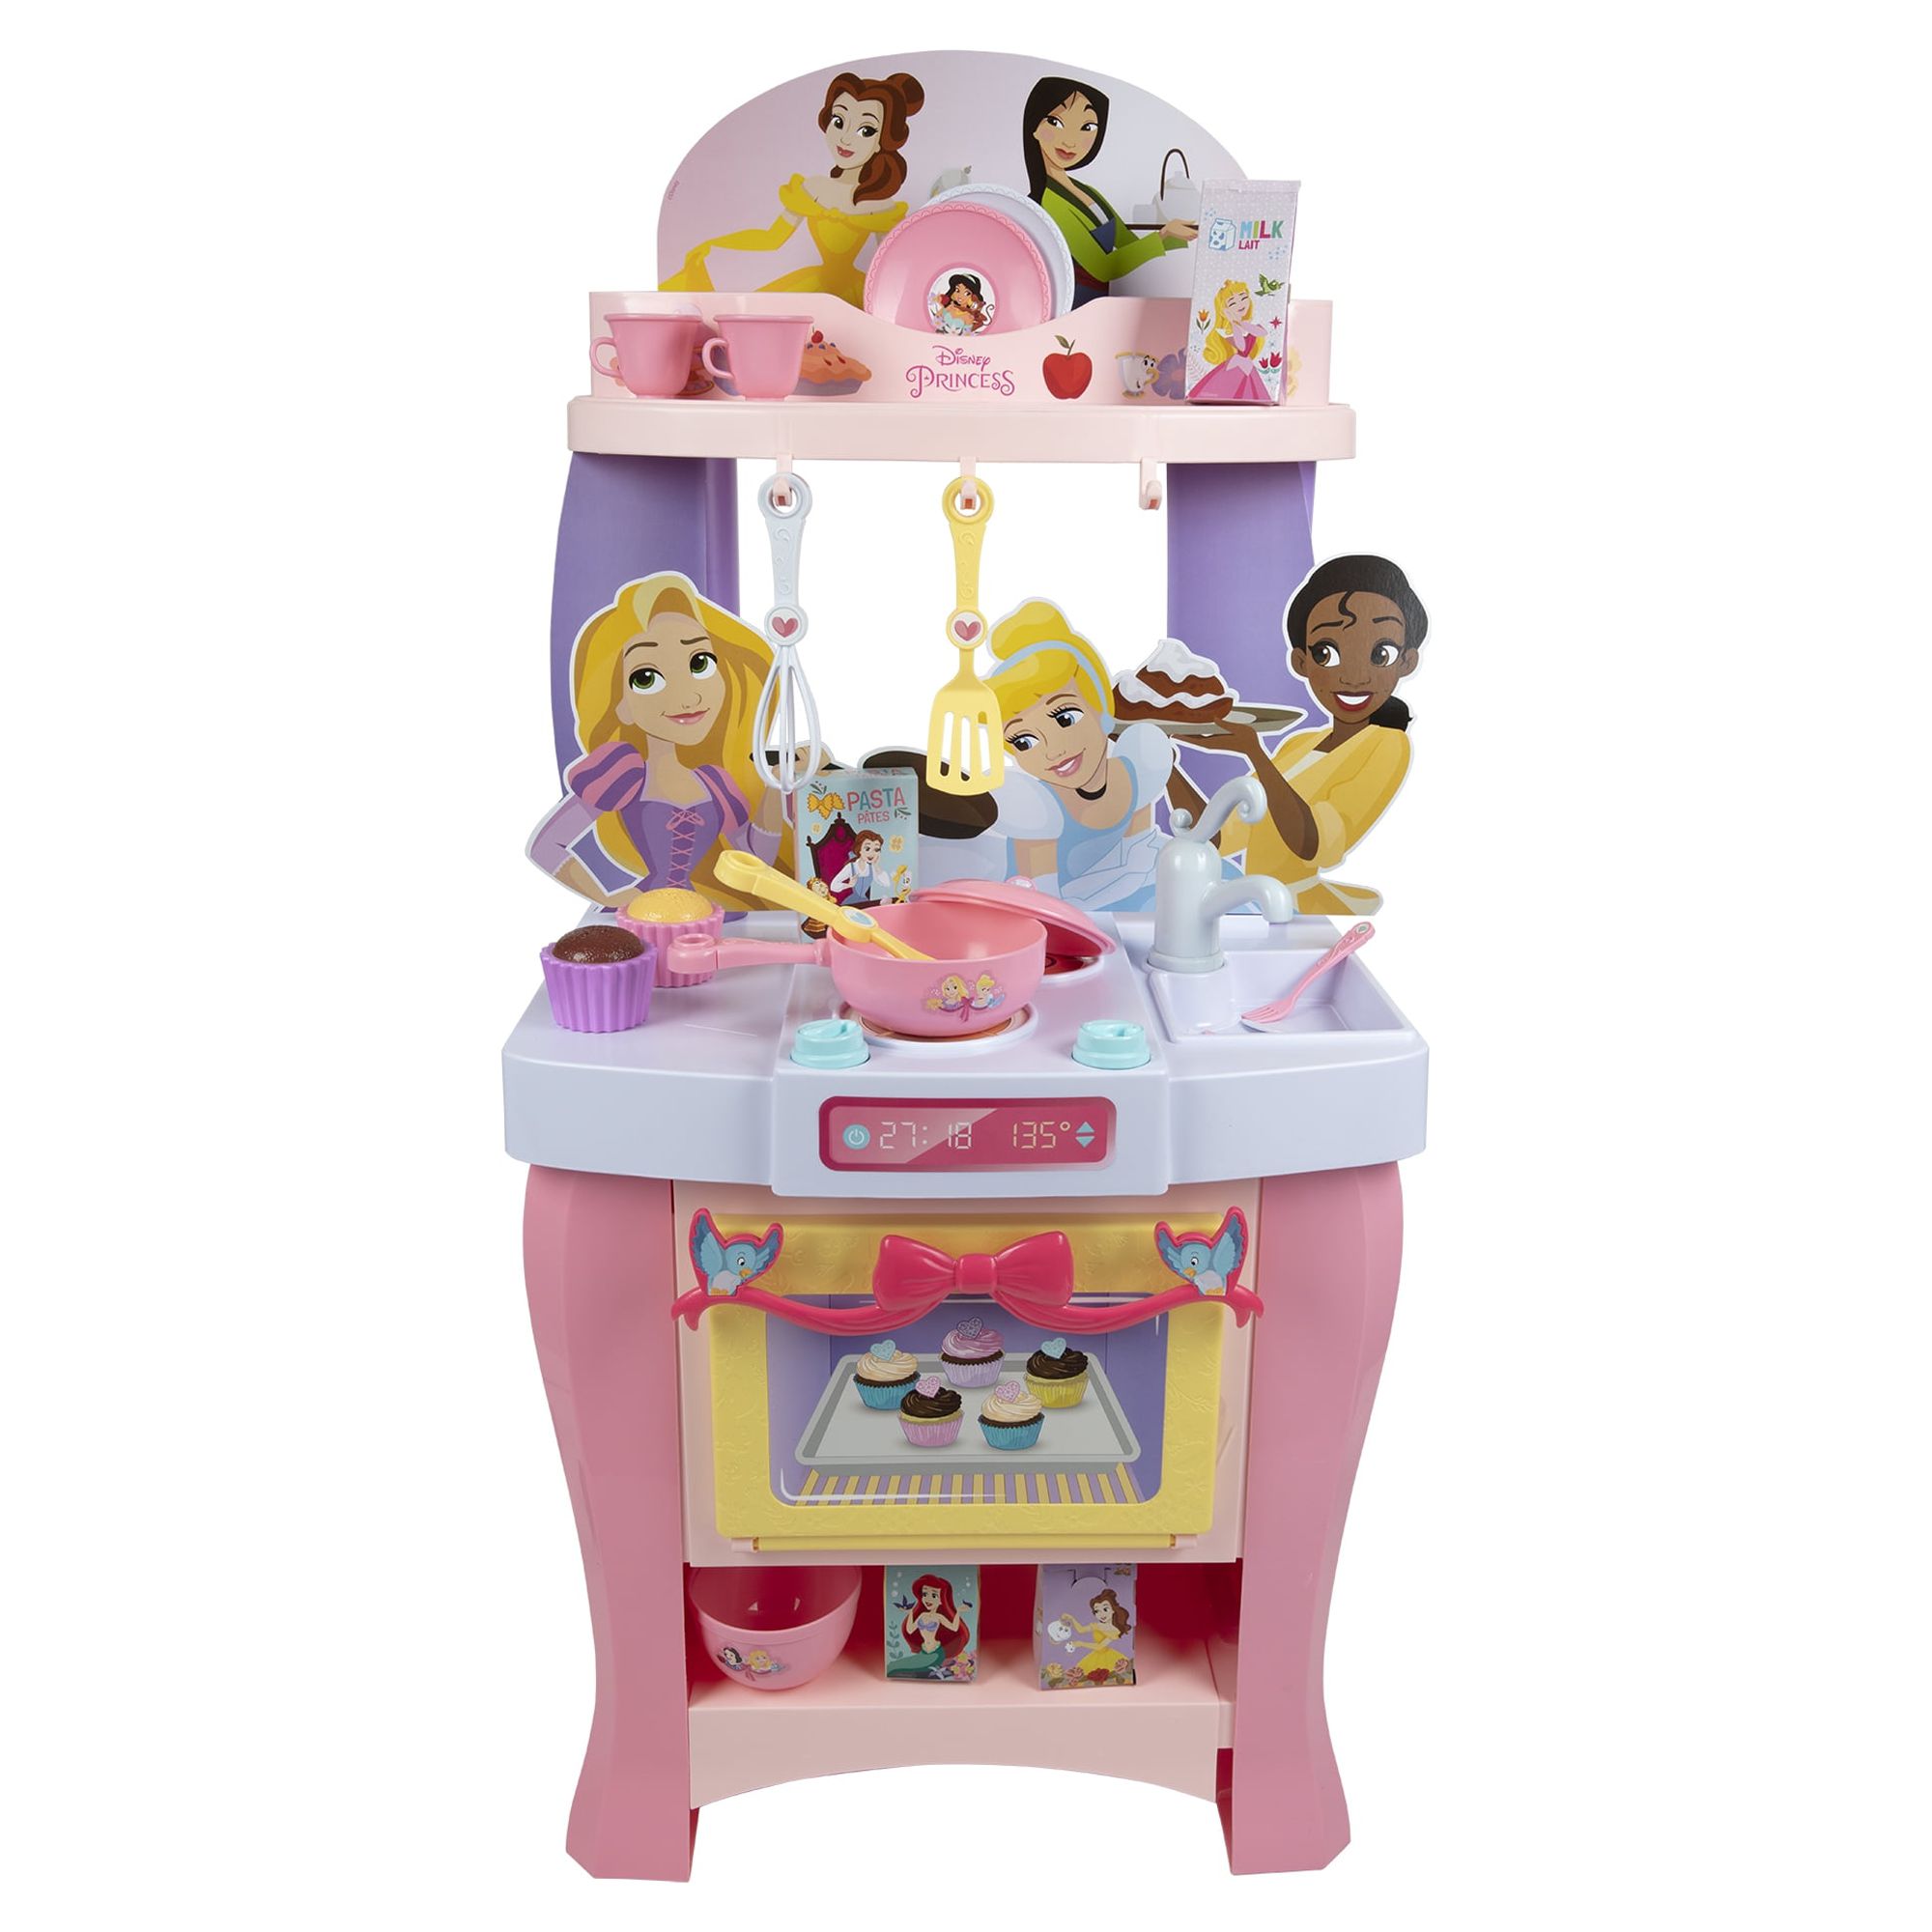 Disney Princess Play Kitchen Includes 20 Accessories, over 3 Feet Tall - image 1 of 6